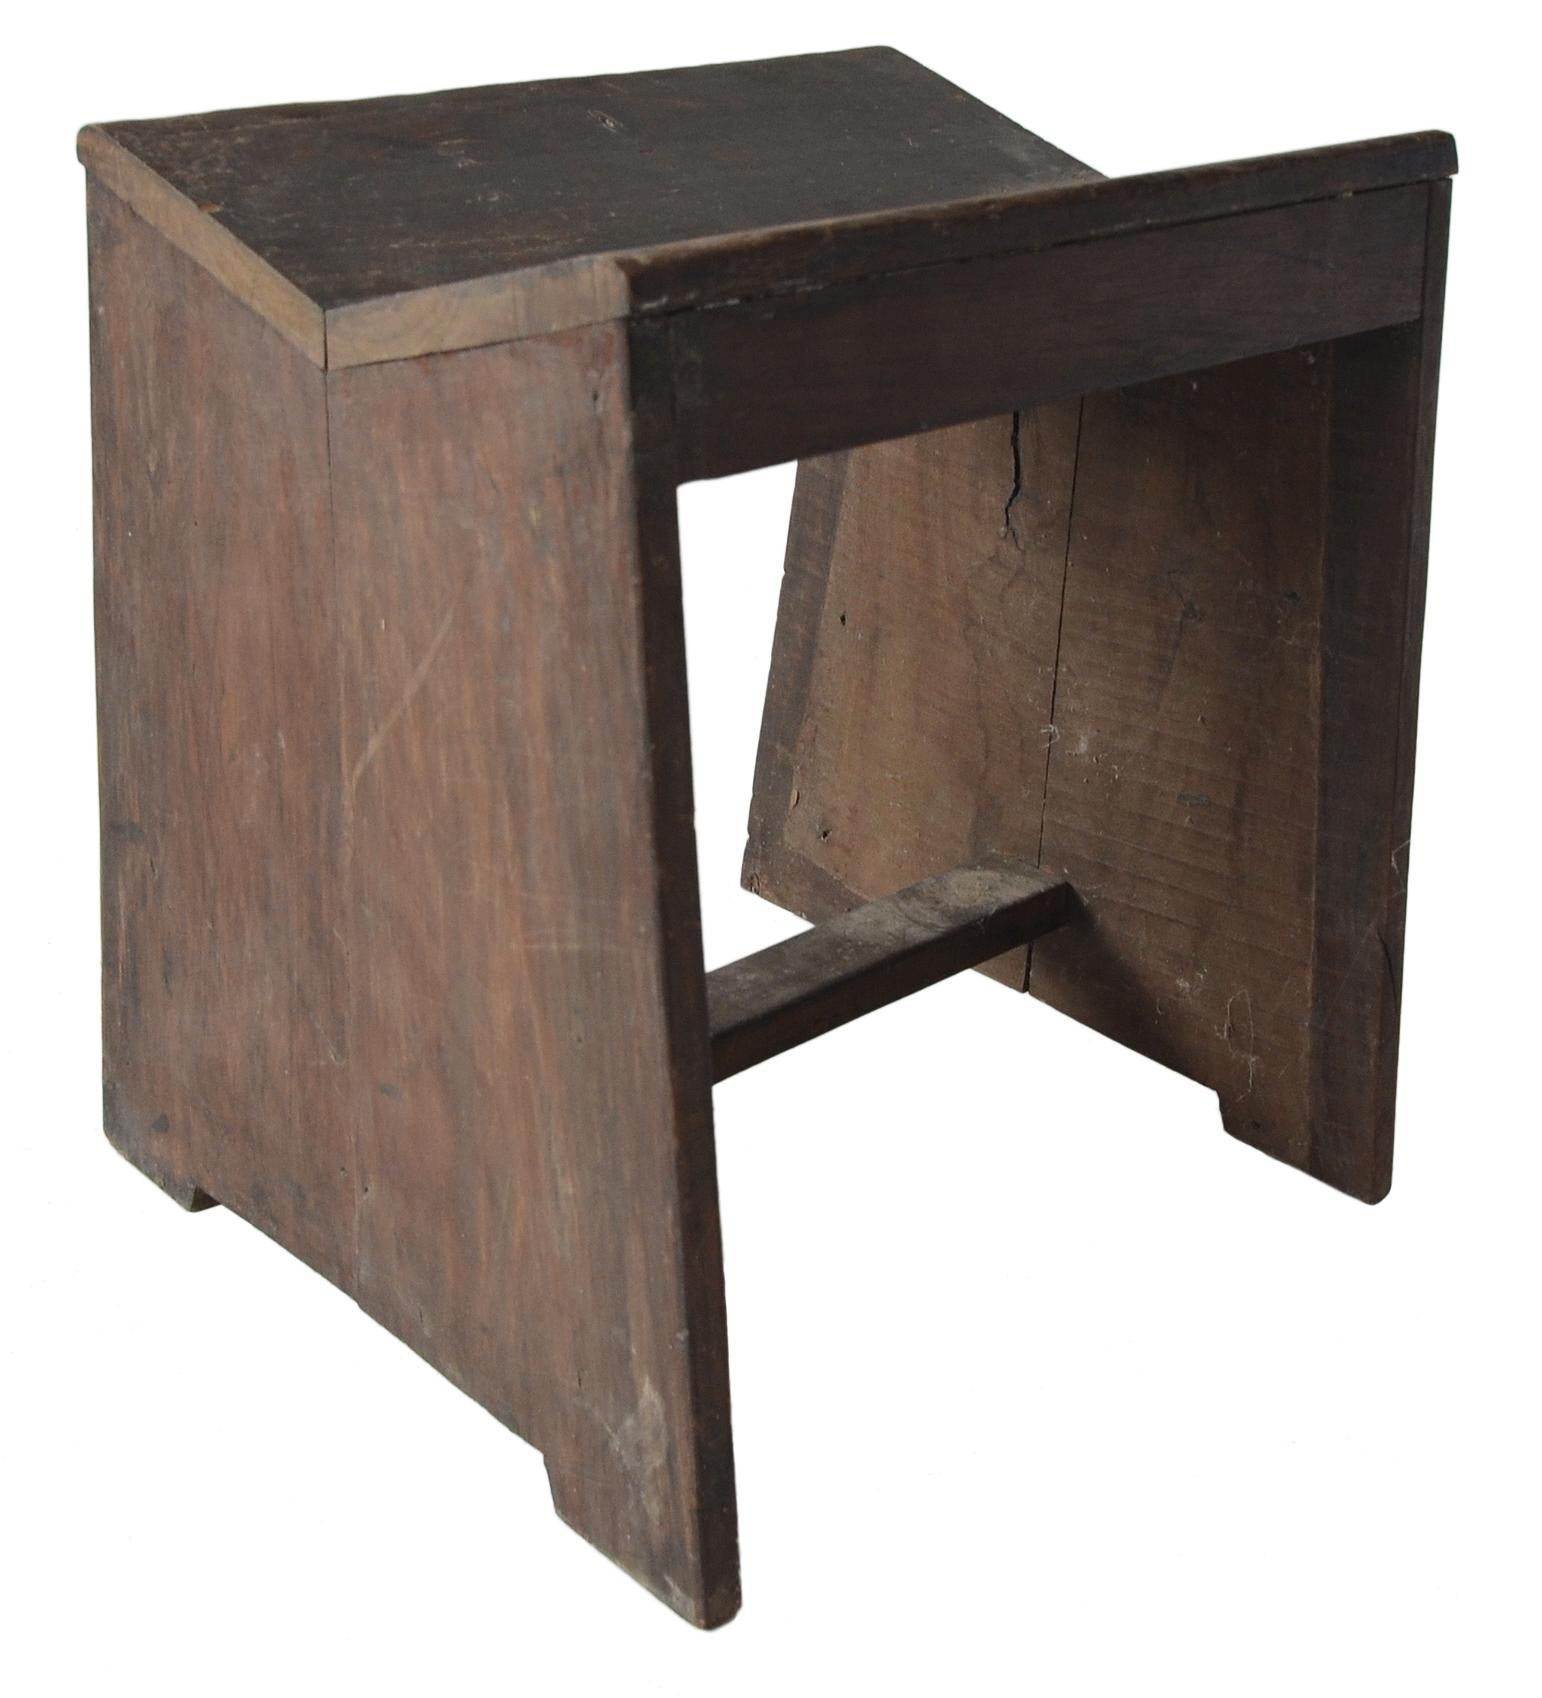 A very rare modernist stool by Pierre Jeanneret for the Chandigarh Project, circa 1956 Model PJ-SI-68-A These stools are incredibly rare and are one of the most coveted examples of Pierre Jeanneret's furnishings for Chandigarh. Only a dozen or so of